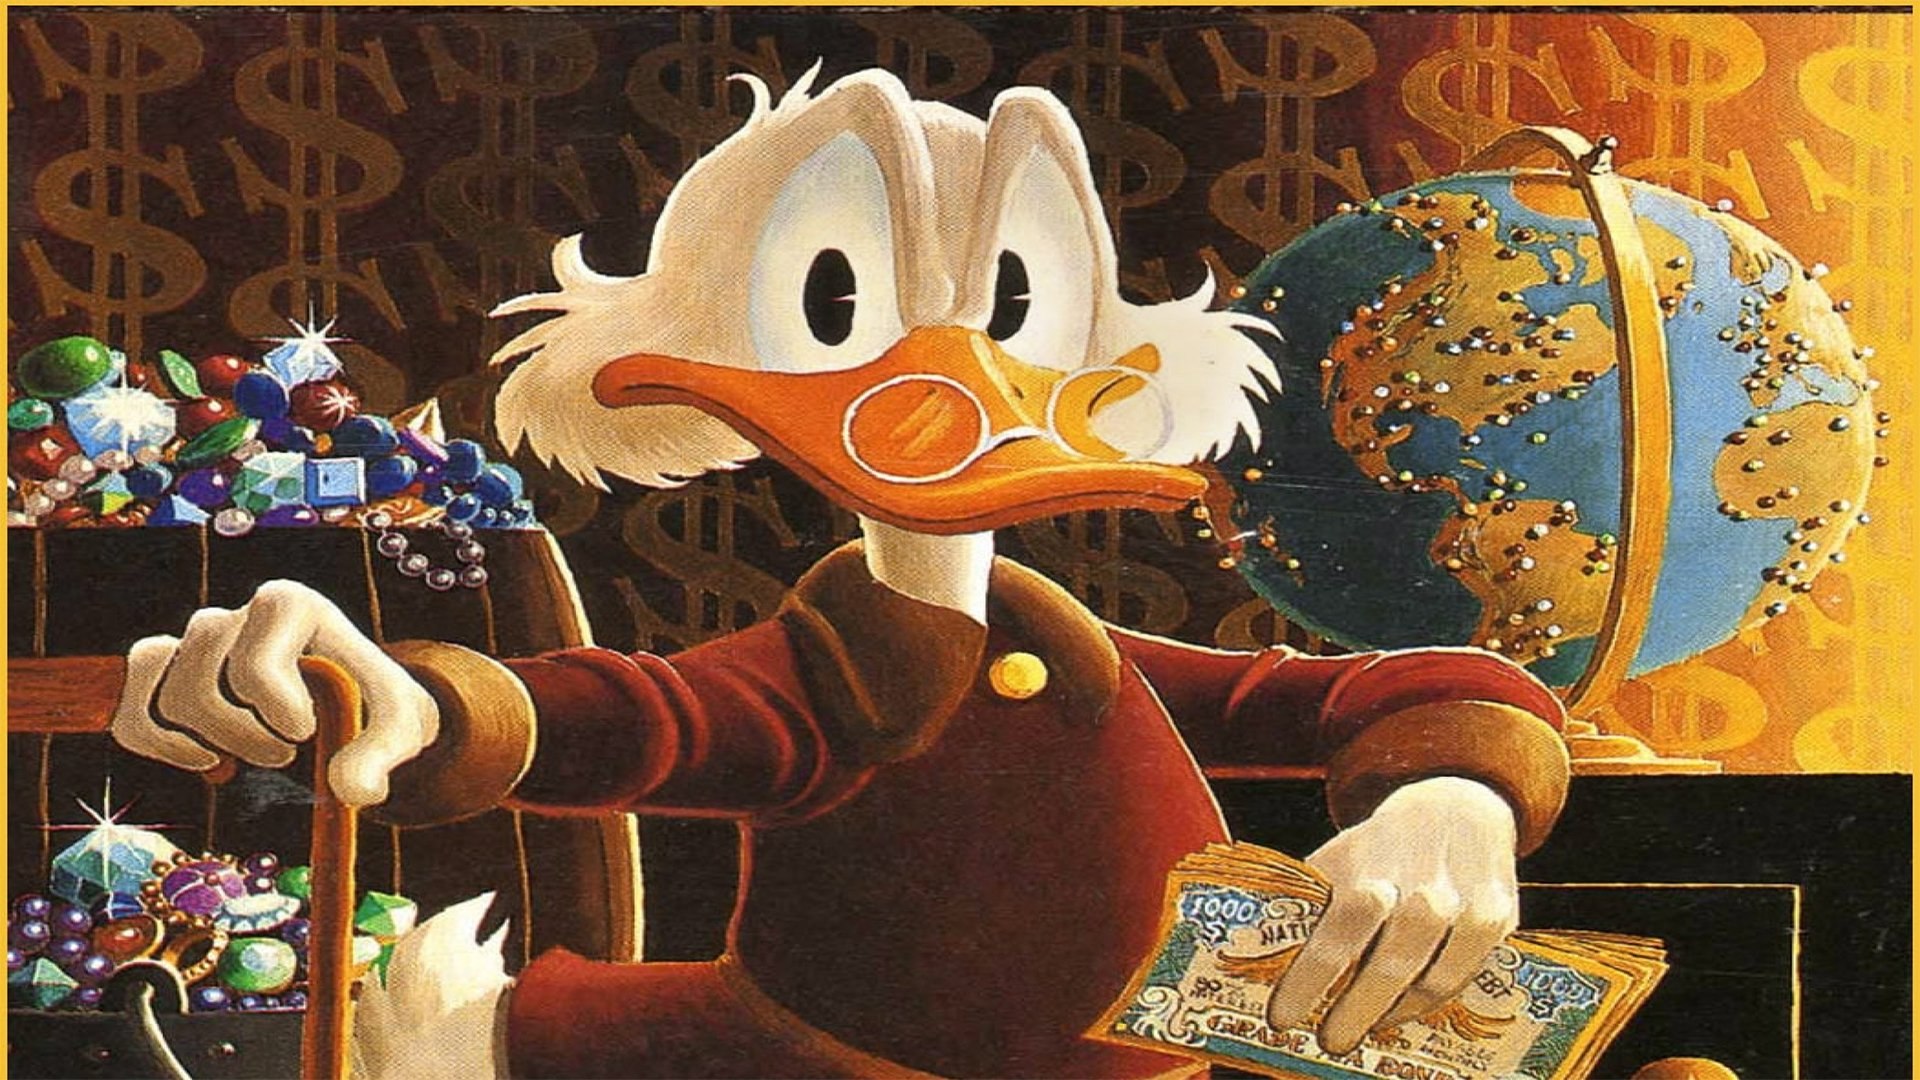 Could This Funko Pop Make You Rich: The Untold Story of Scrooge McDuck Collectibles